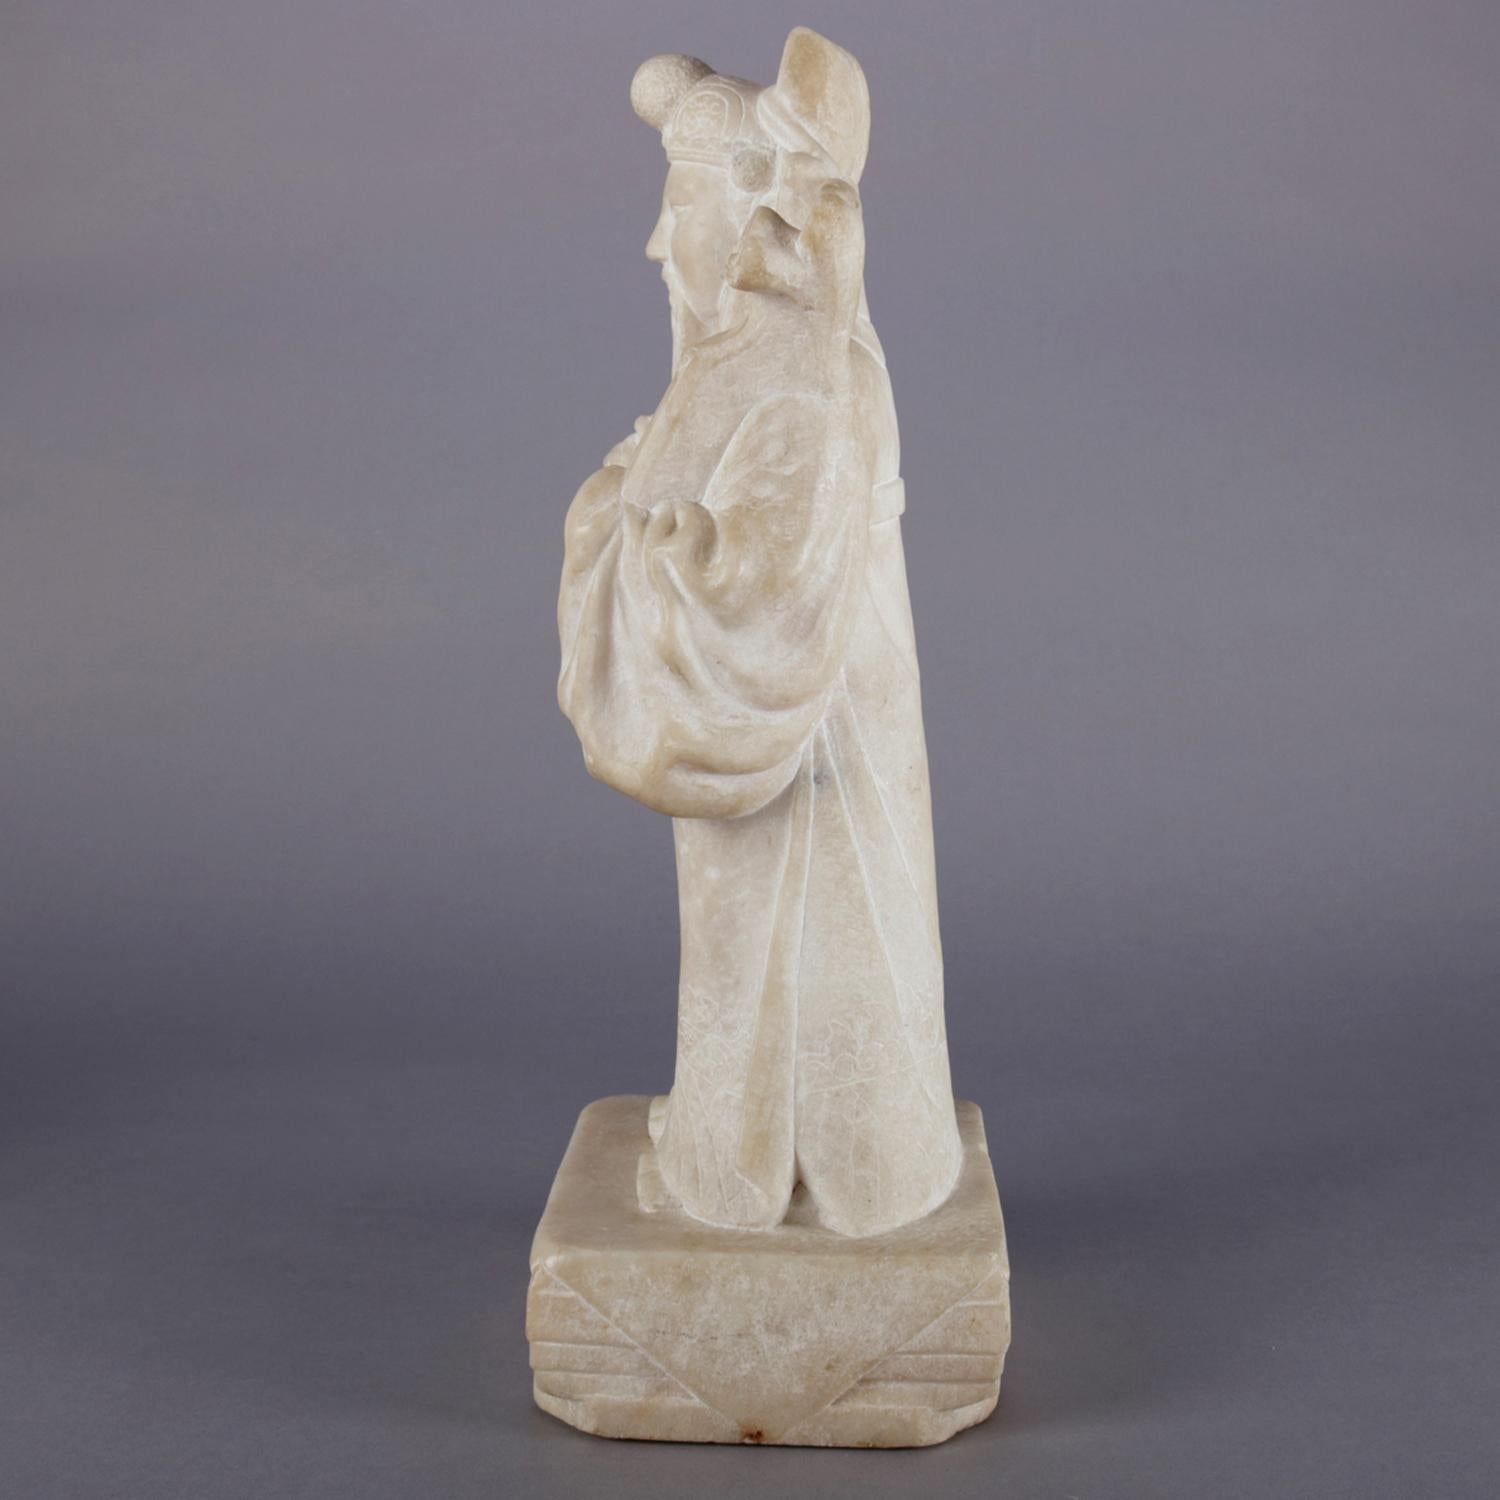 Hand-Carved Chinese Figural Carved Alabaster Portrait Sculpture of Emperor, 19th Century